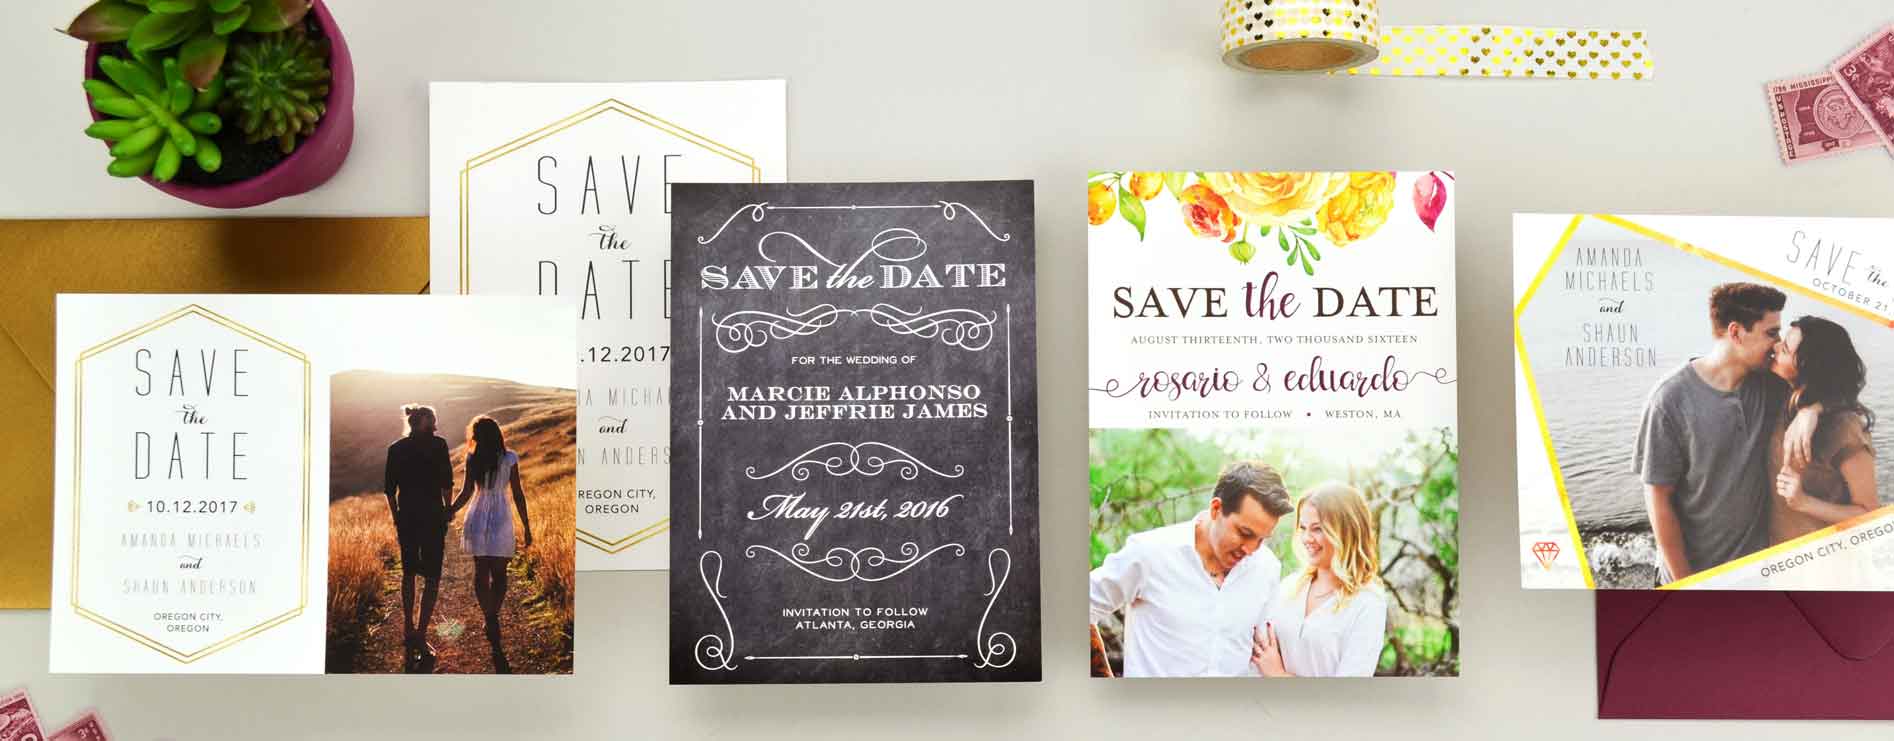 Personalised Photo Wedding Save the Date Cards x 12 with envelopes H1125 